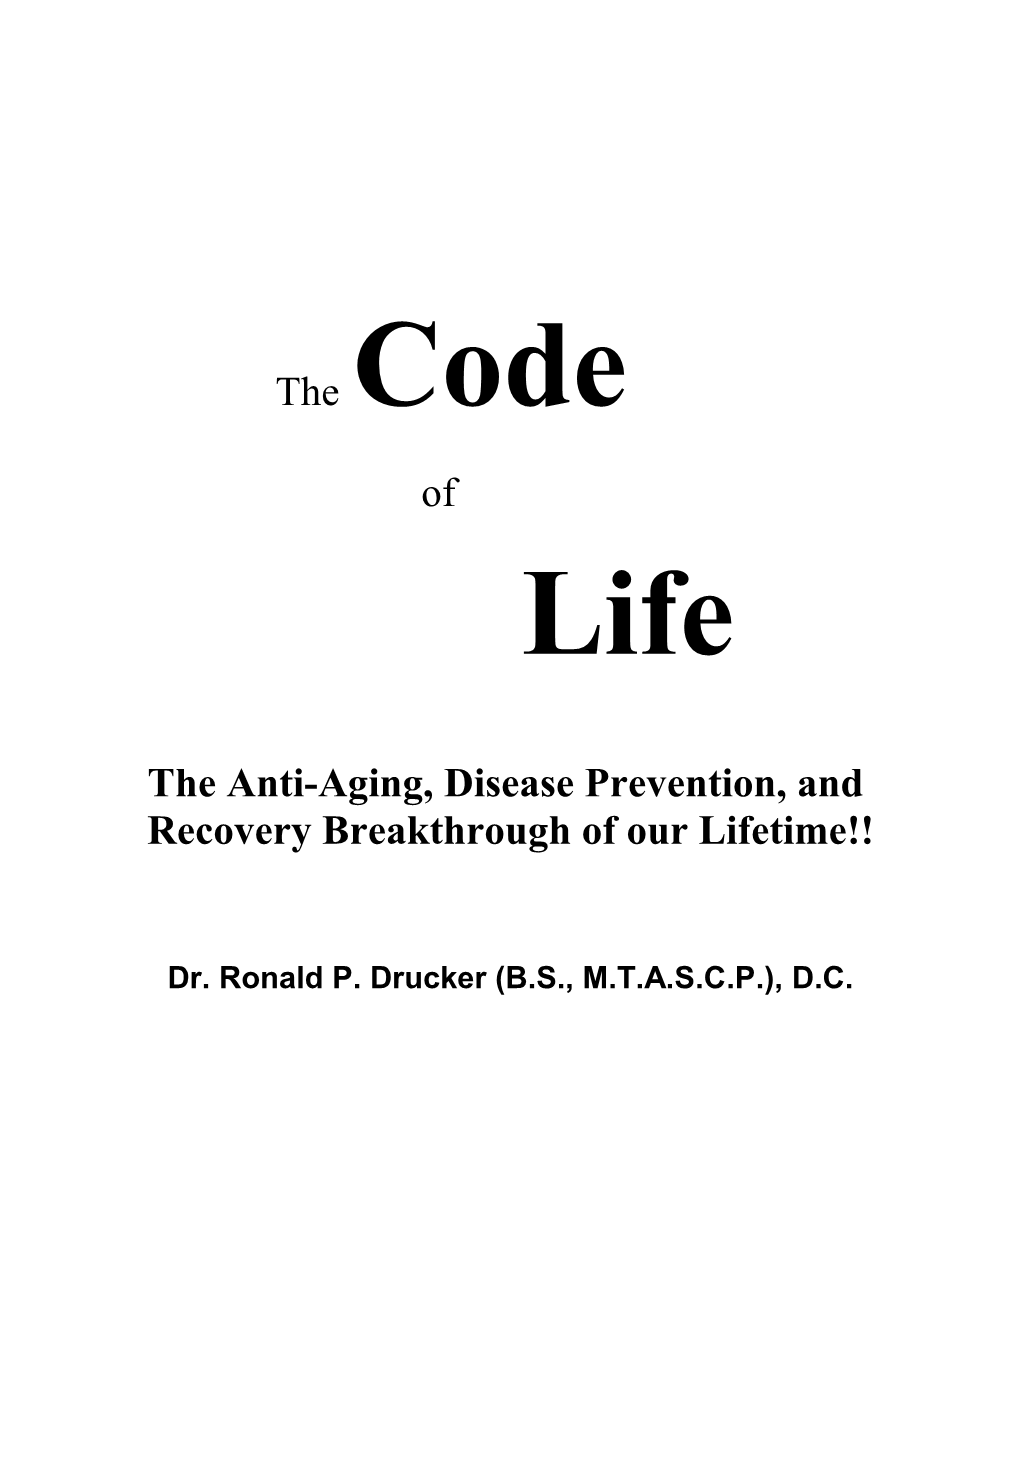 The Anti-Aging, Disease Prevention, And